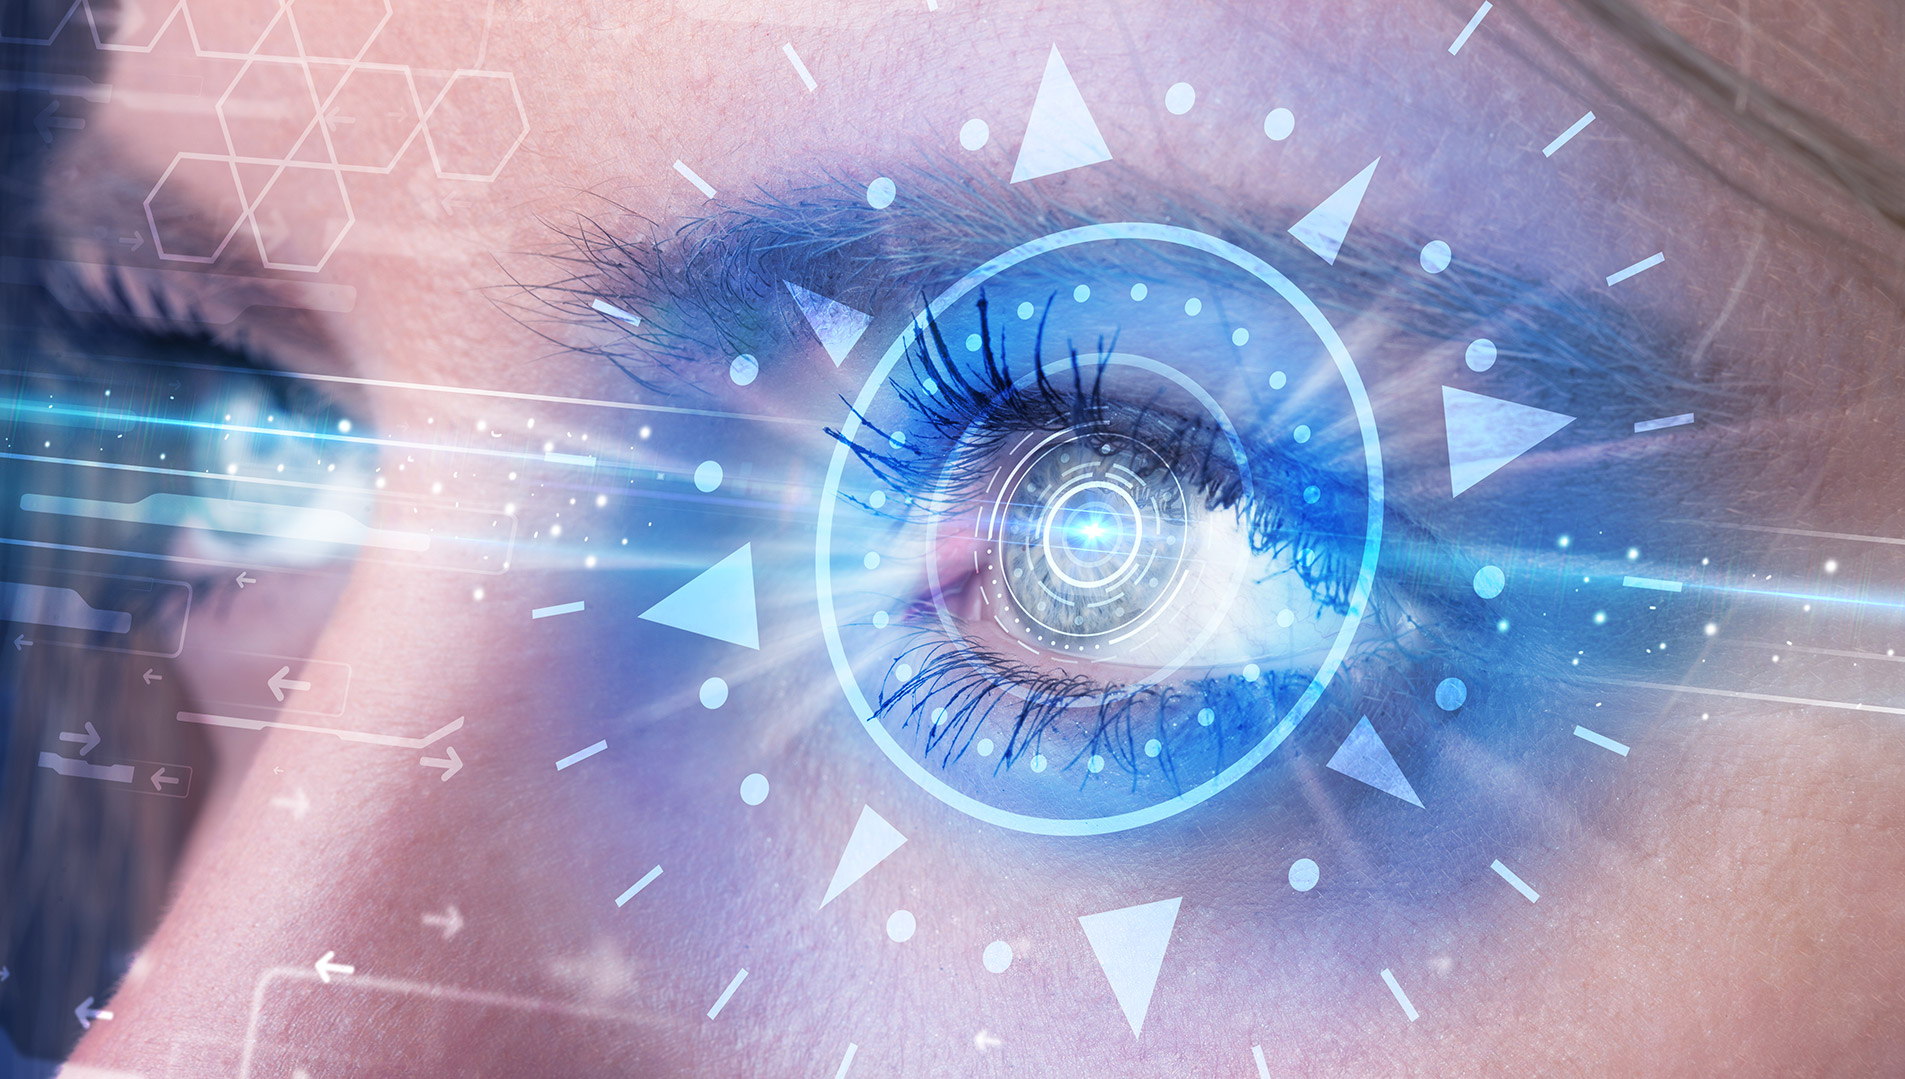 A light blue hologram emanates from a woman’s eye.